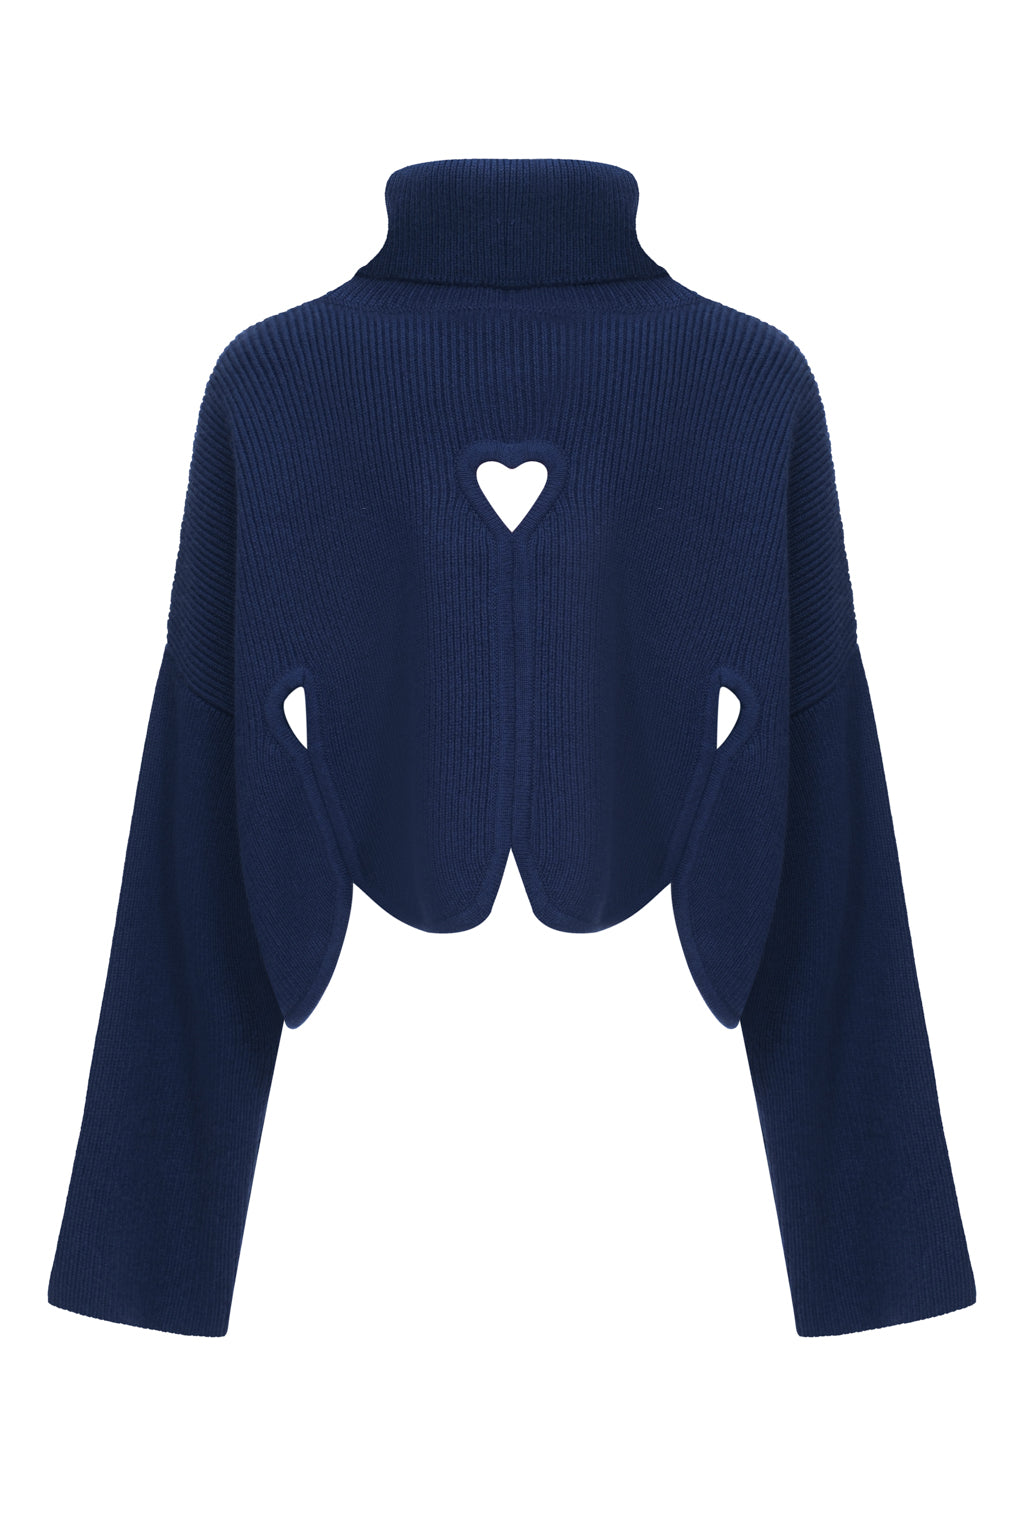 Pure cashmere turtleneck sweater with heart cutout - midnight blue